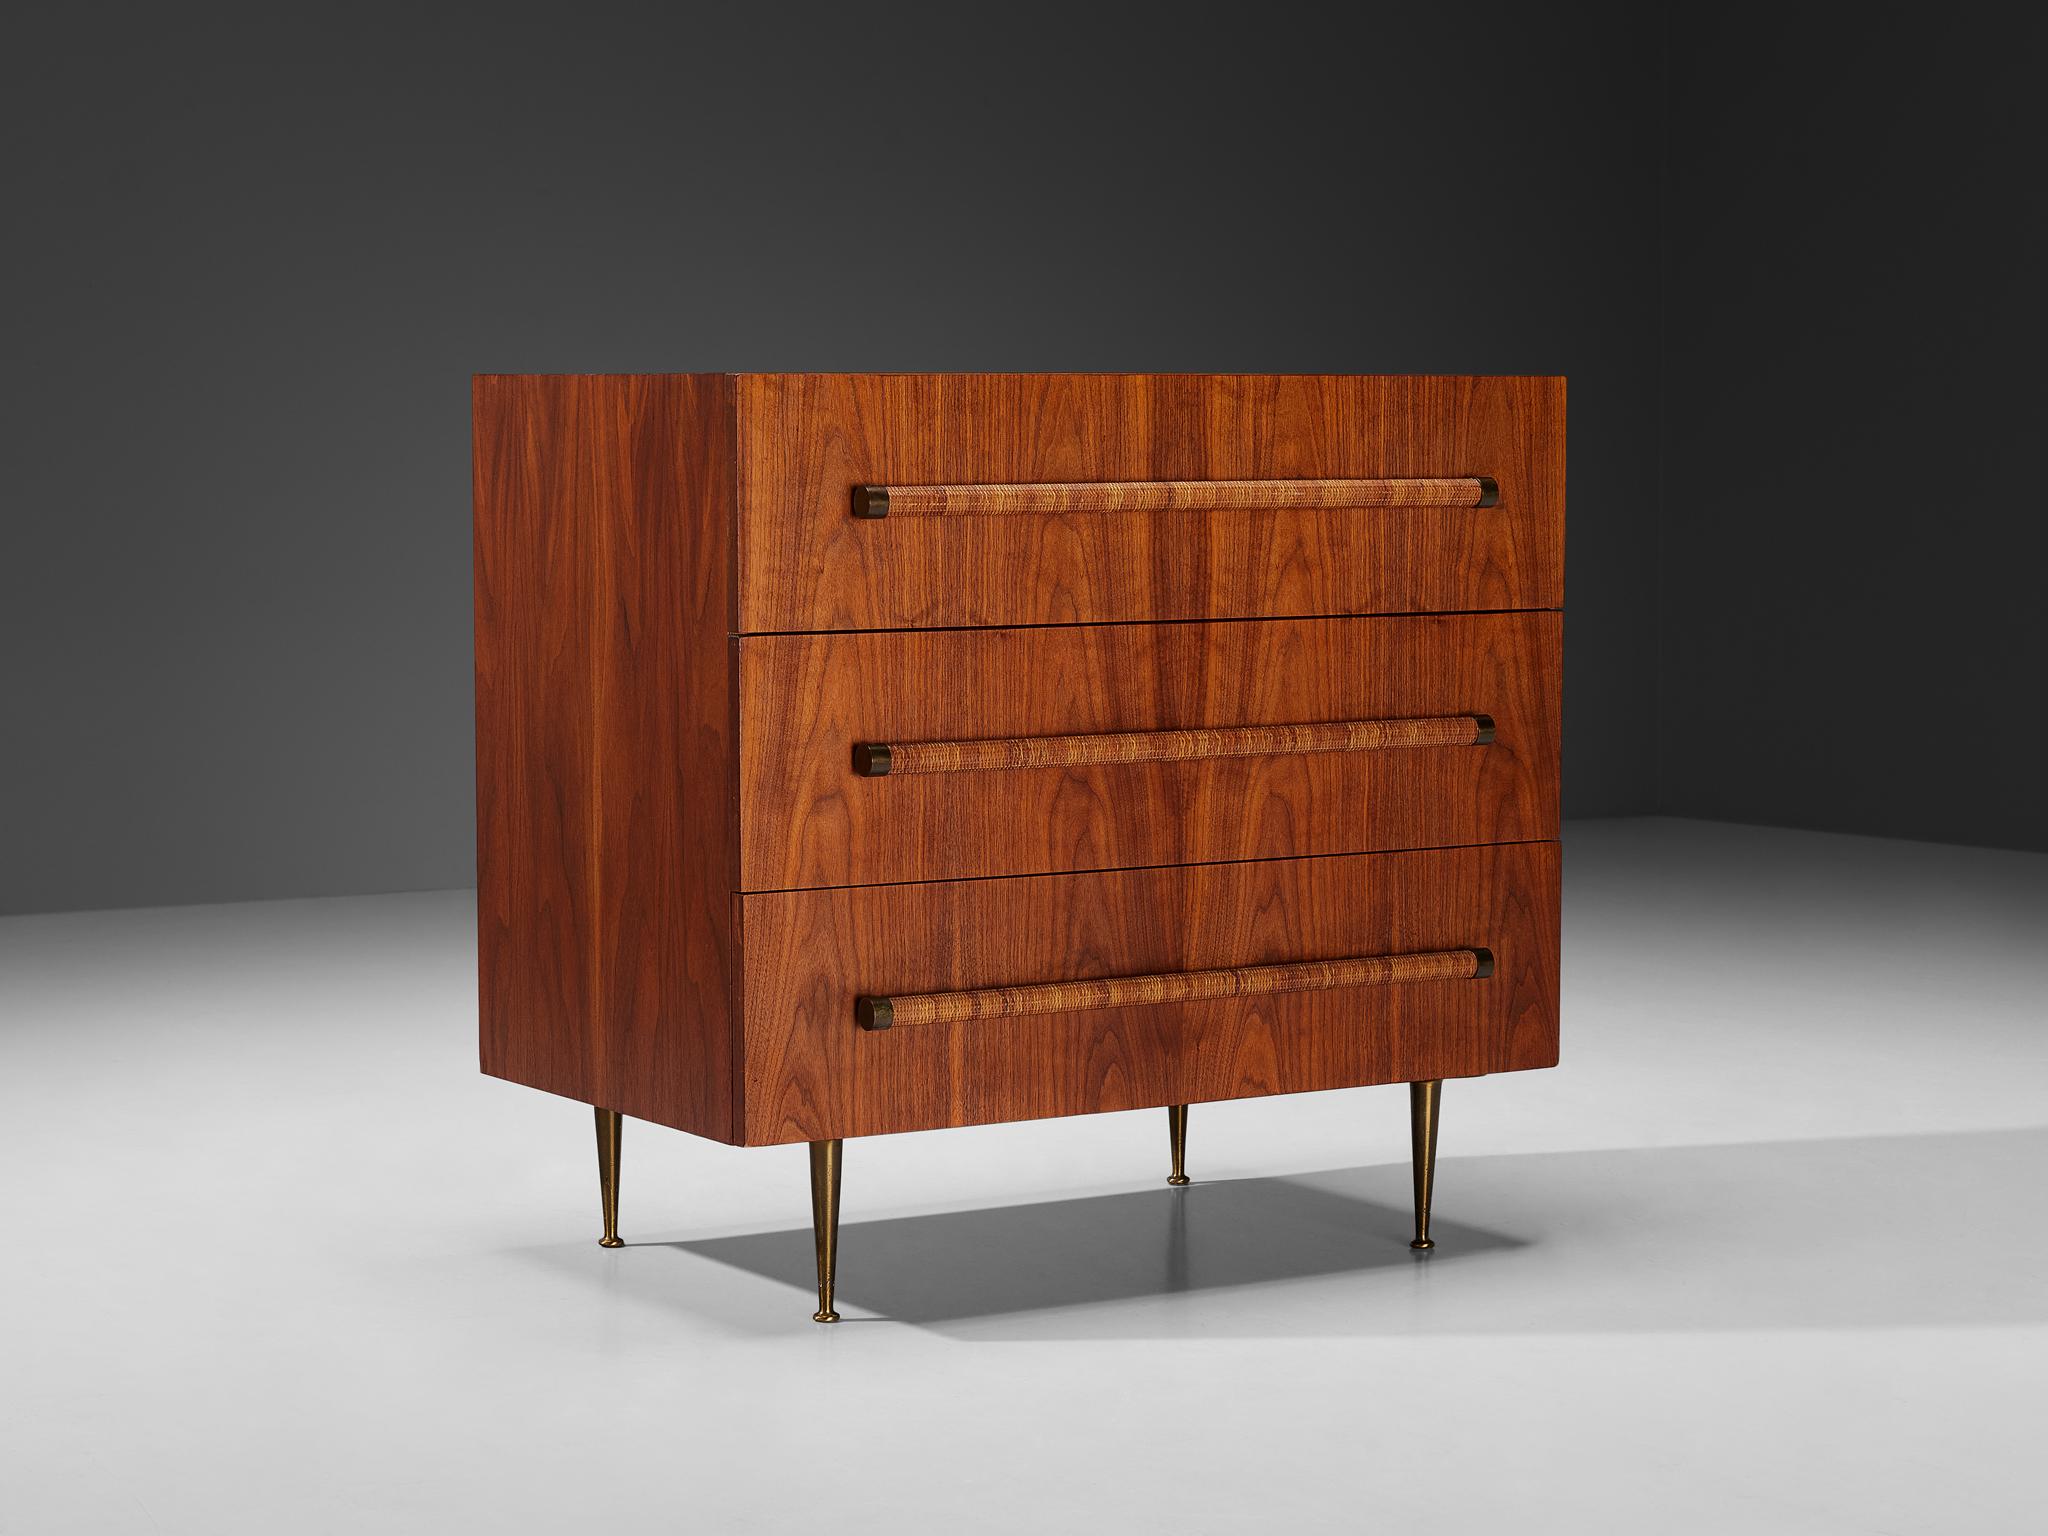 T.H. Robsjohn-Gibbings for Widdicomb Furniture Co., chest of drawers, walnut, cane, brass, United States, 1950s

This lovely chest of drawers is designed by British designer T.H. Robsjohn-Gibbings for Widdicomb Furniture Co. Exquisite in its form